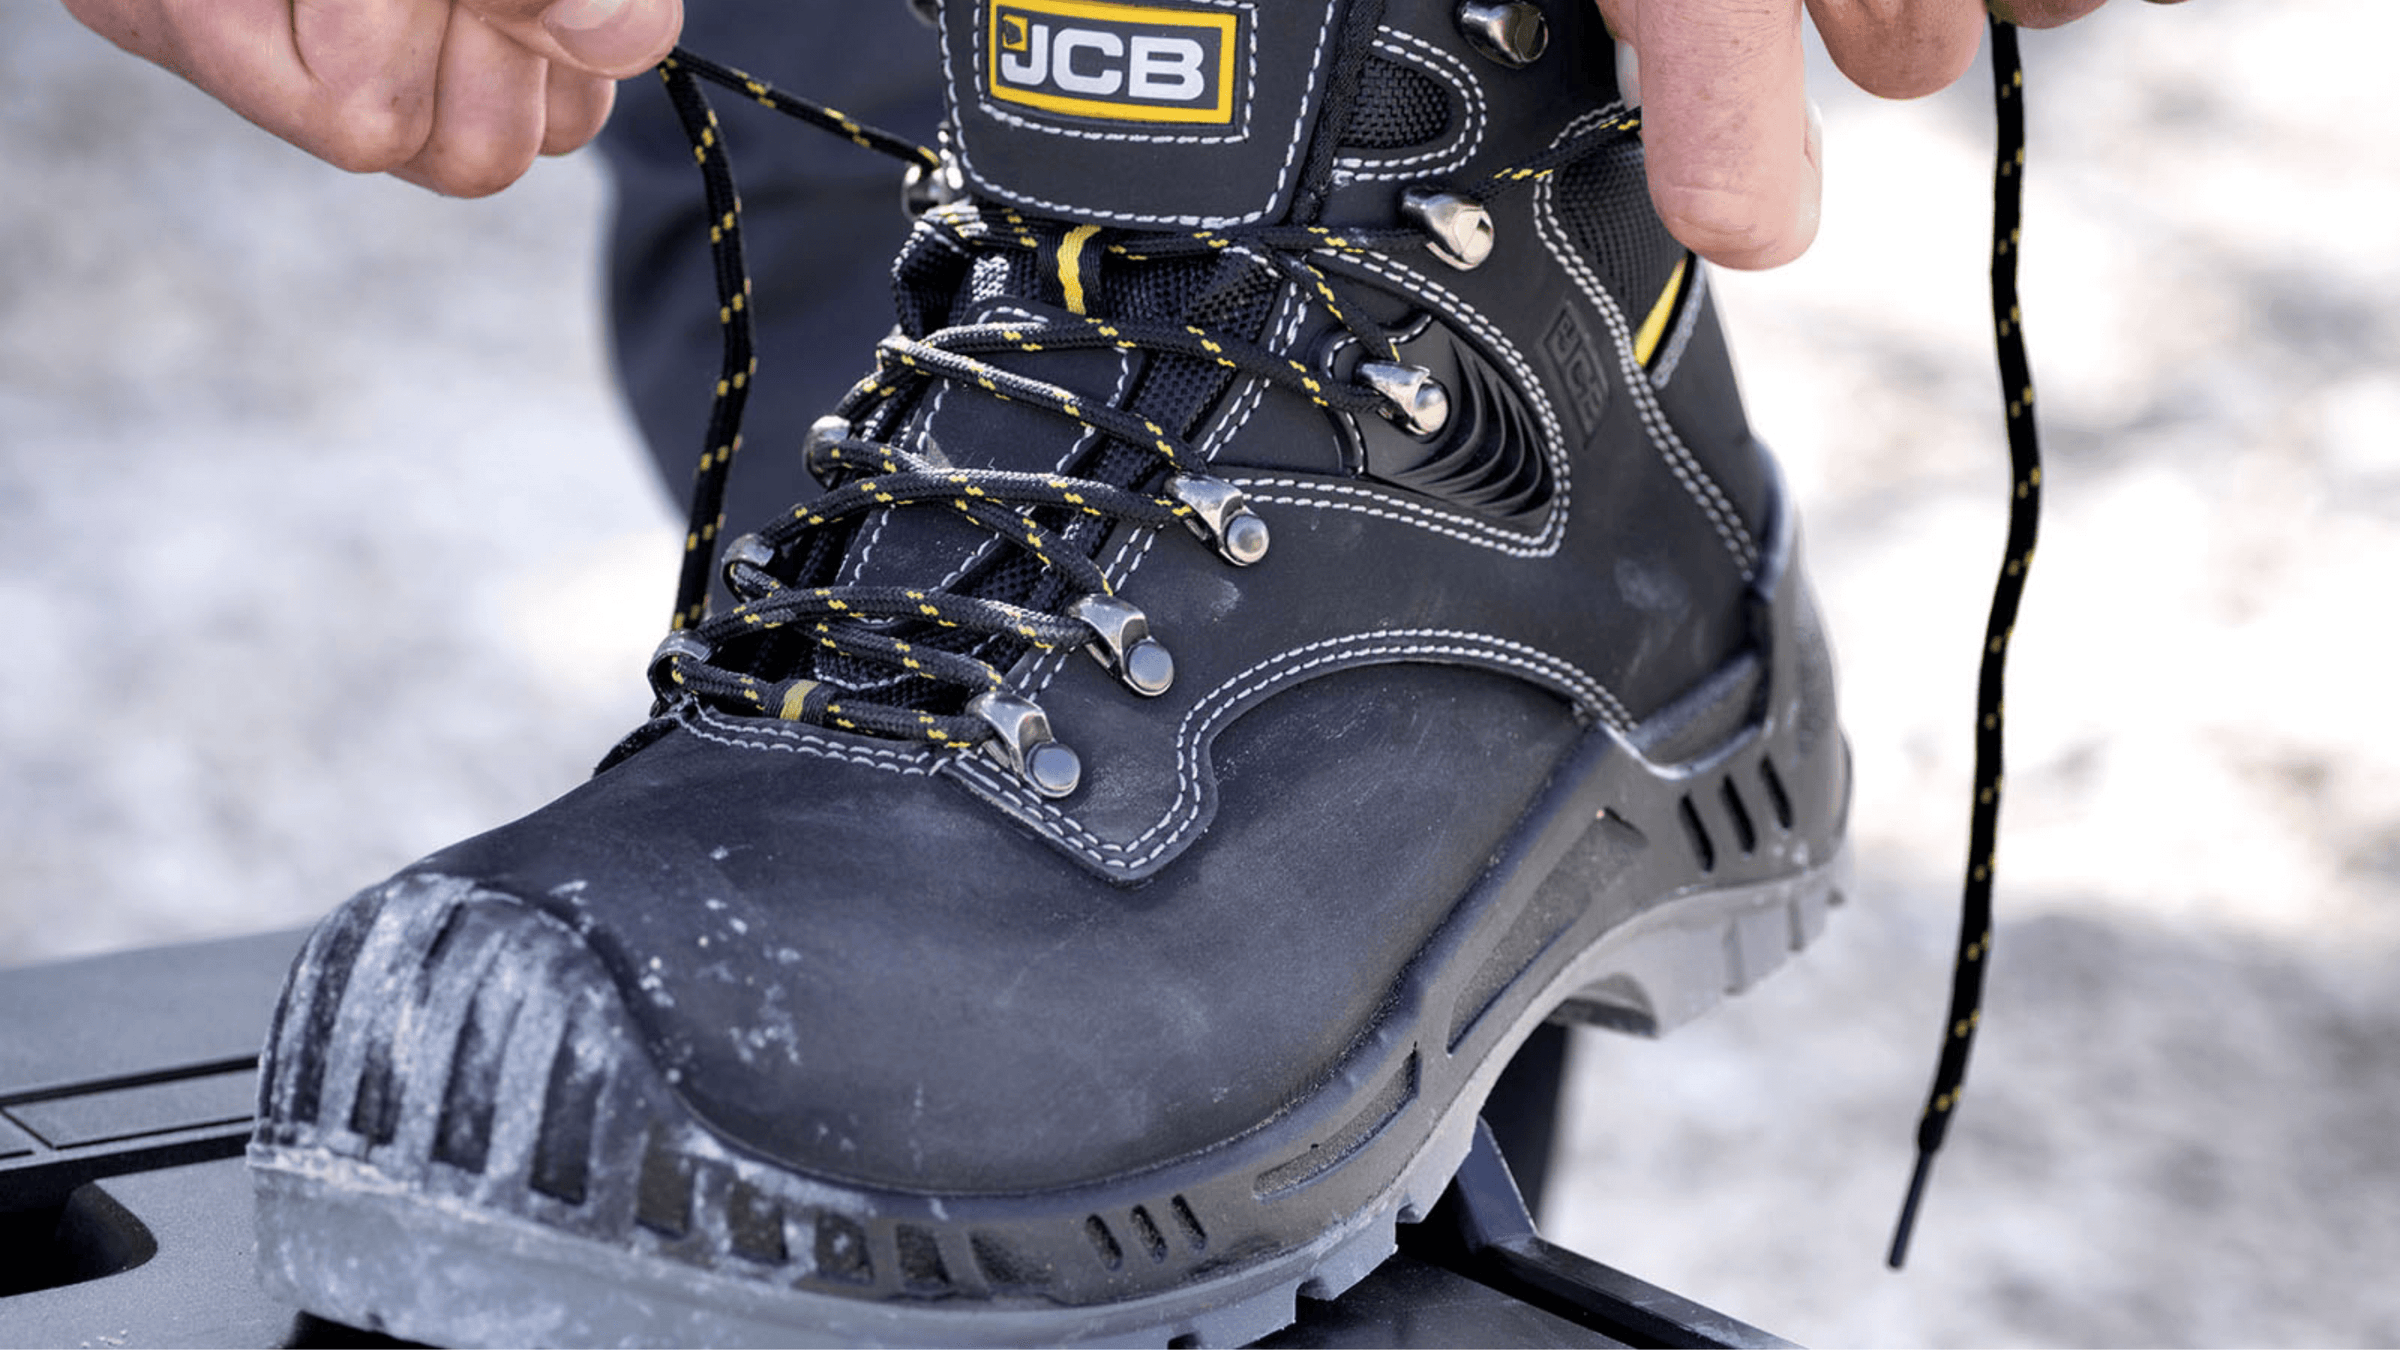 An image of someone wearing JCB Boots